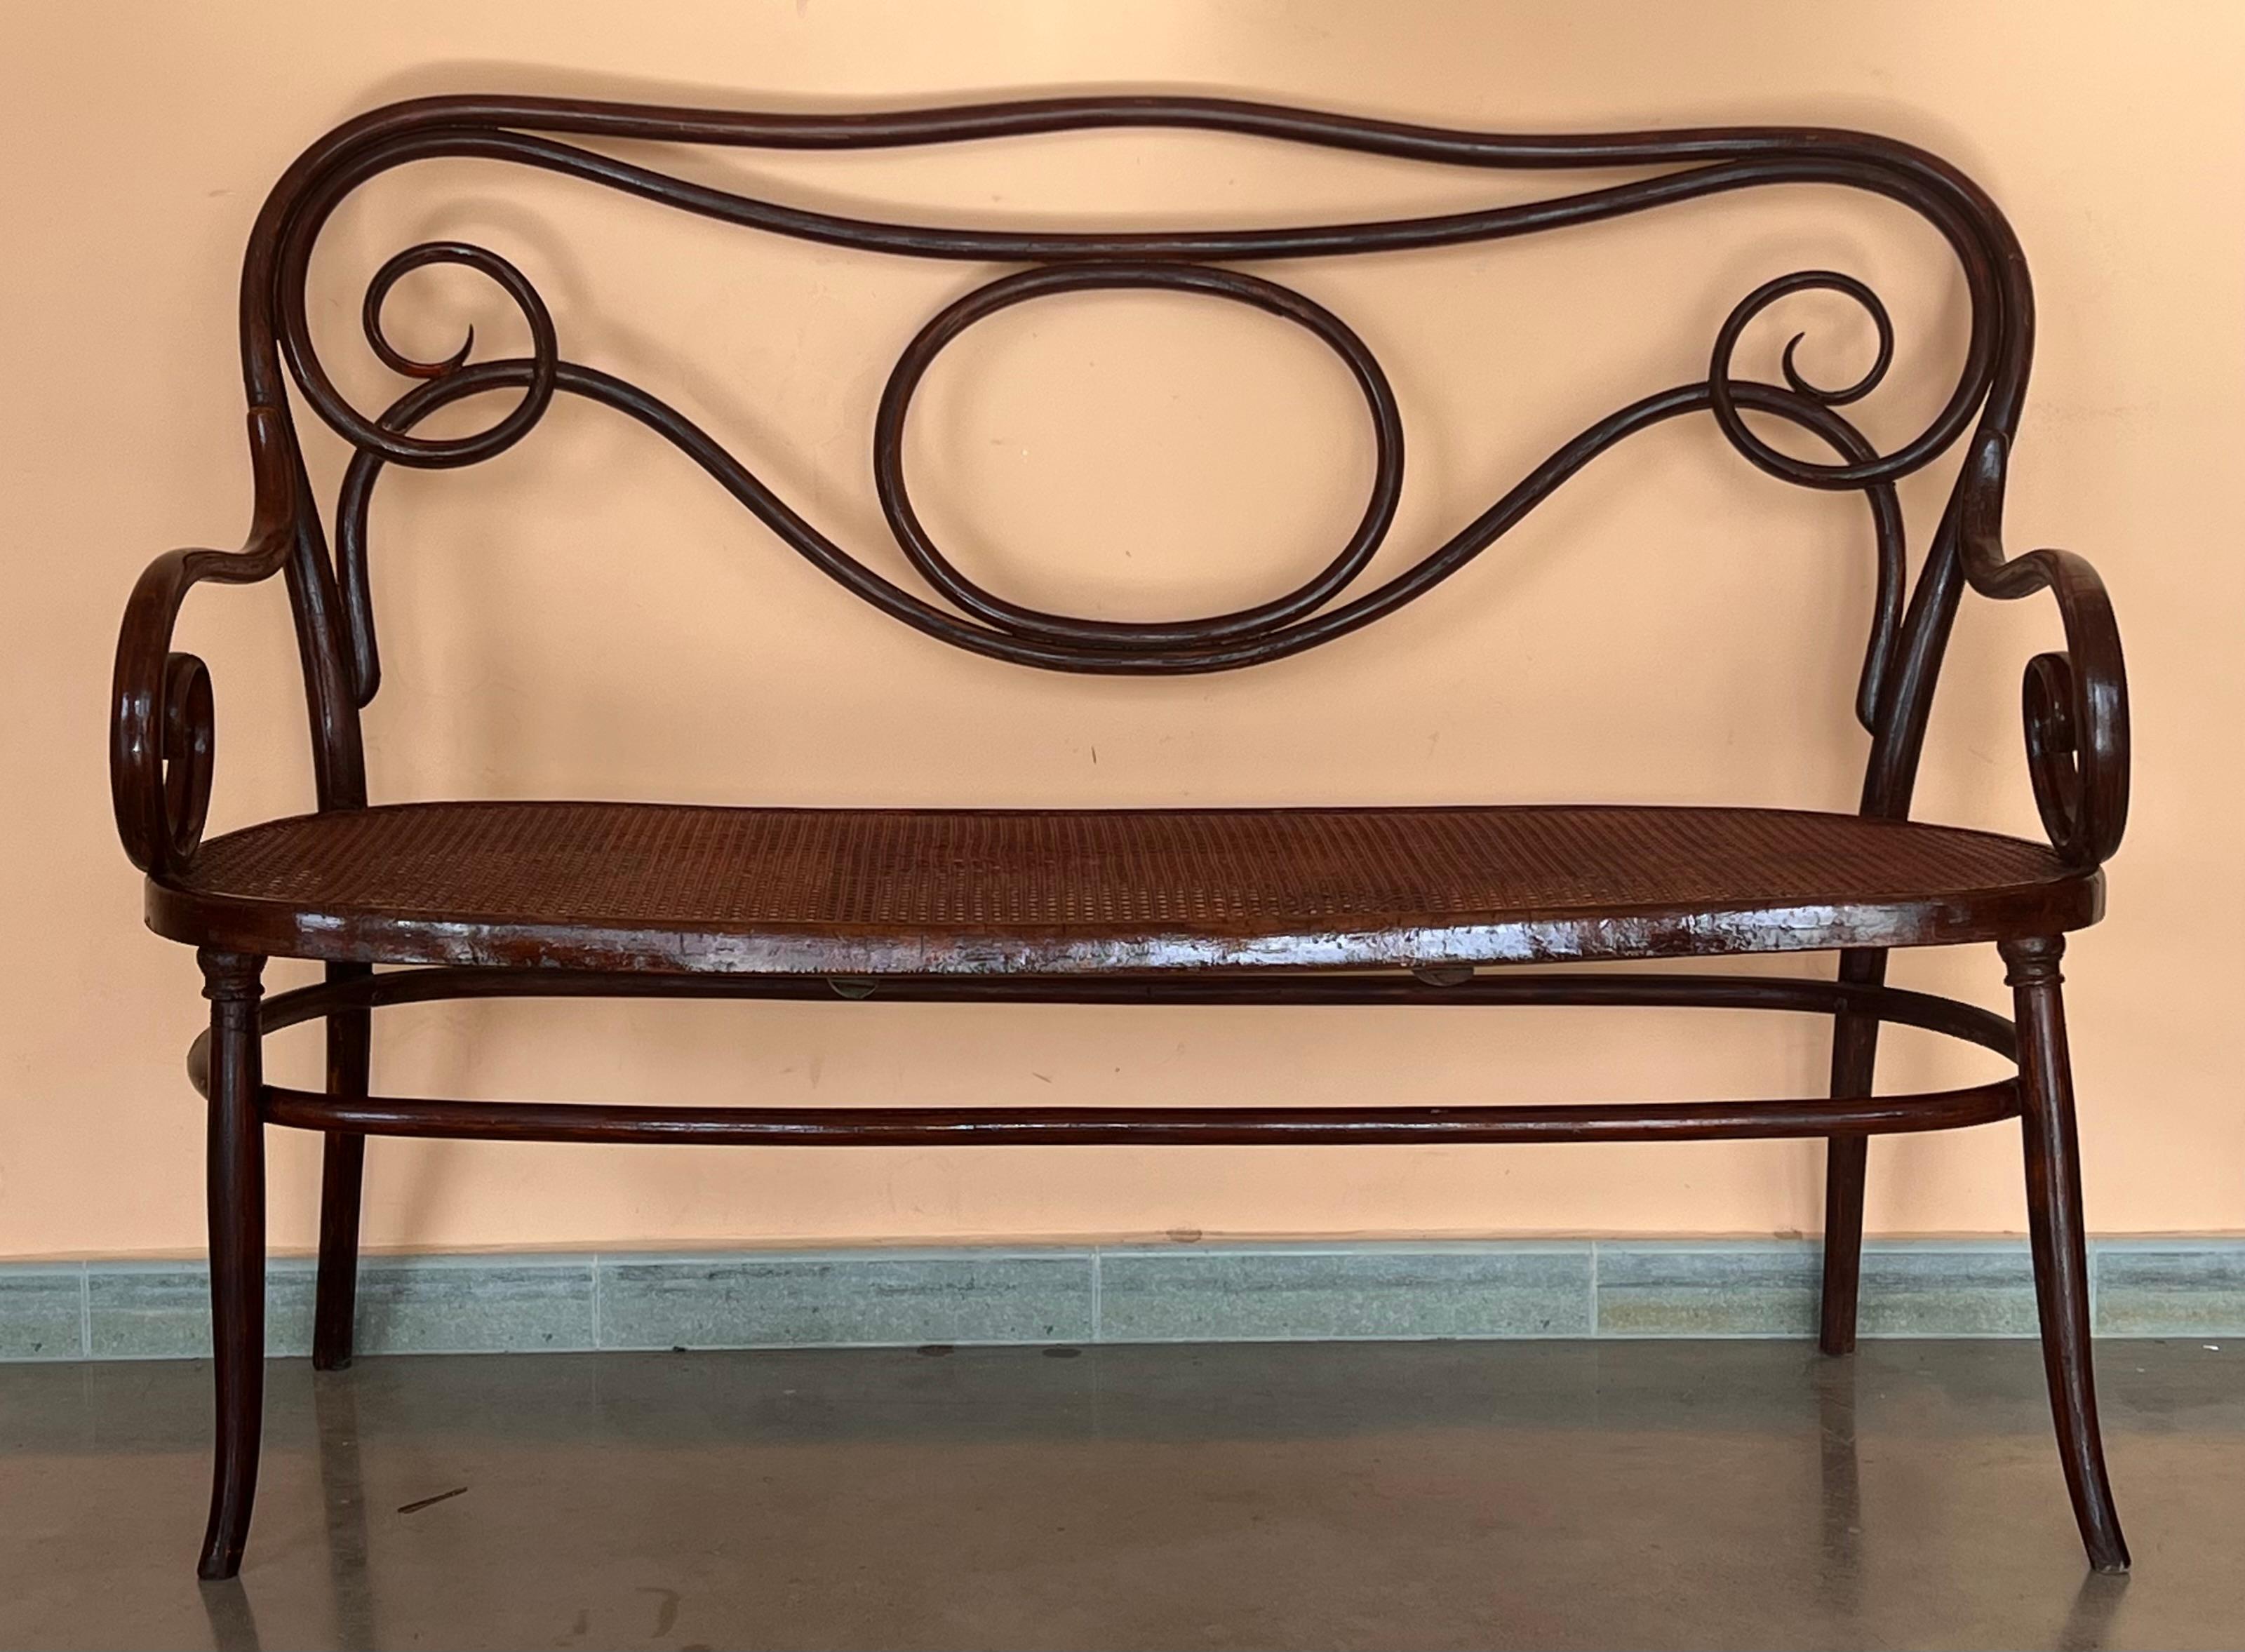 Spanish Colonial 20th Century Bentwood Sofa signed by Fischel, circa 1900, Caned Seat